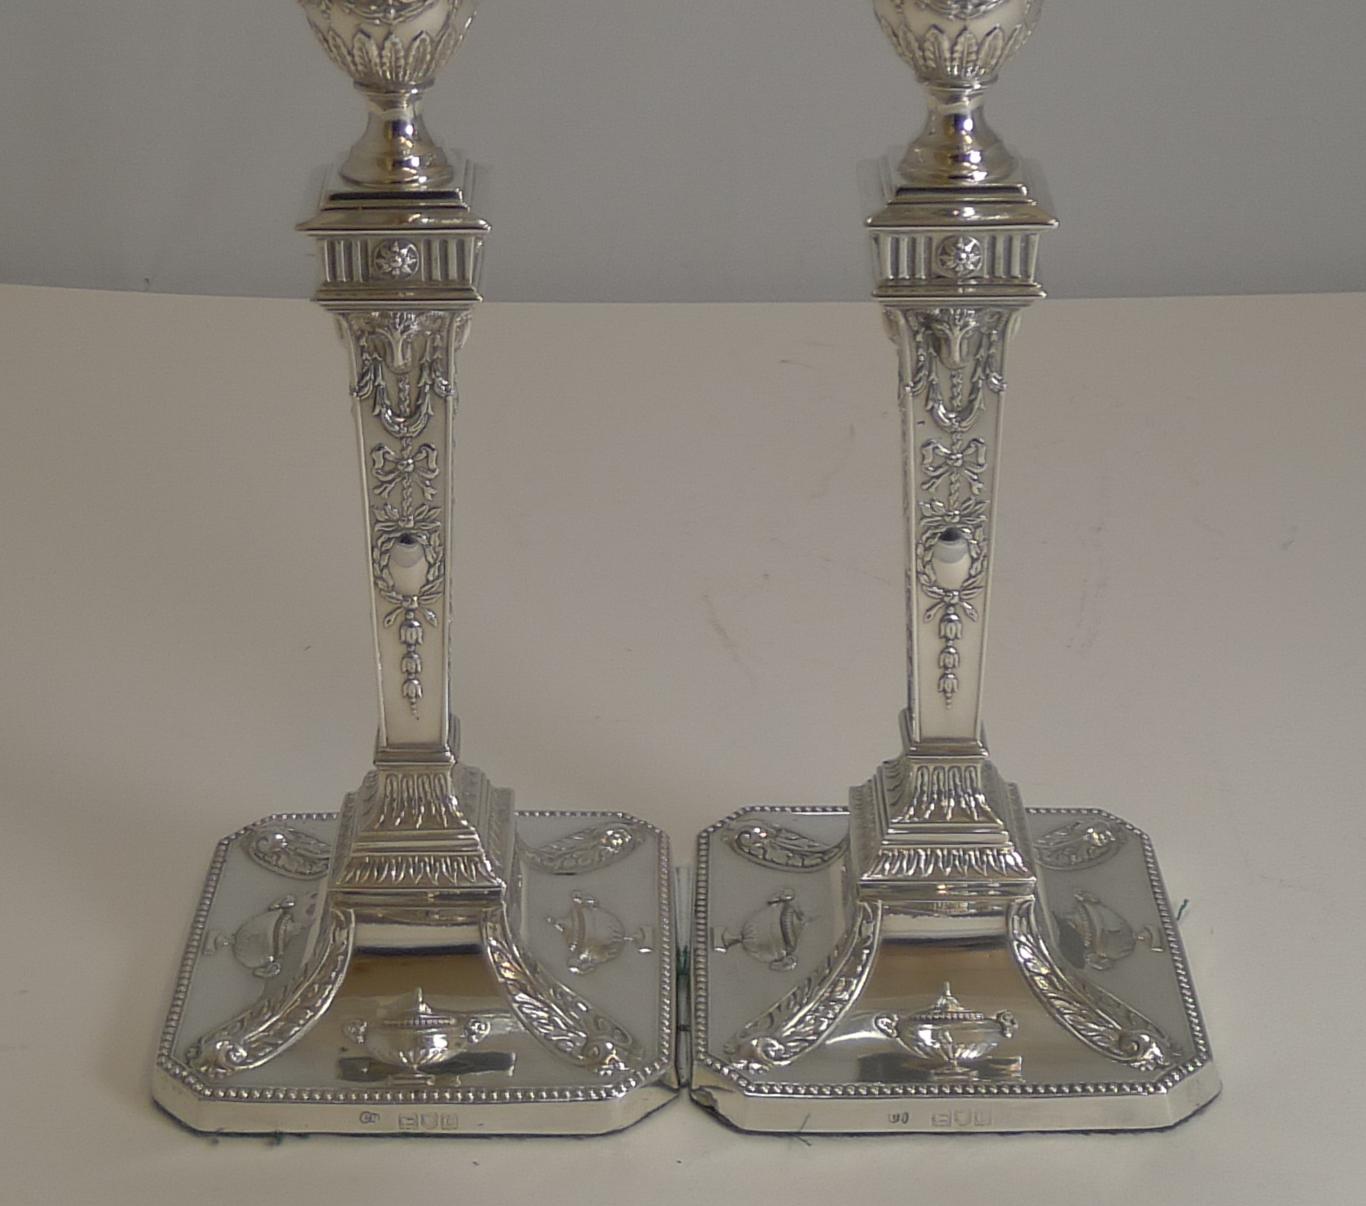 A magnificent pair of late Victorian Adams style candlesticks made from English sterling silver hallmarked for London, 1898.

A highly sought-after design featuring urns to the base, Ram's heads to all four sides of the columns. The drip trays are